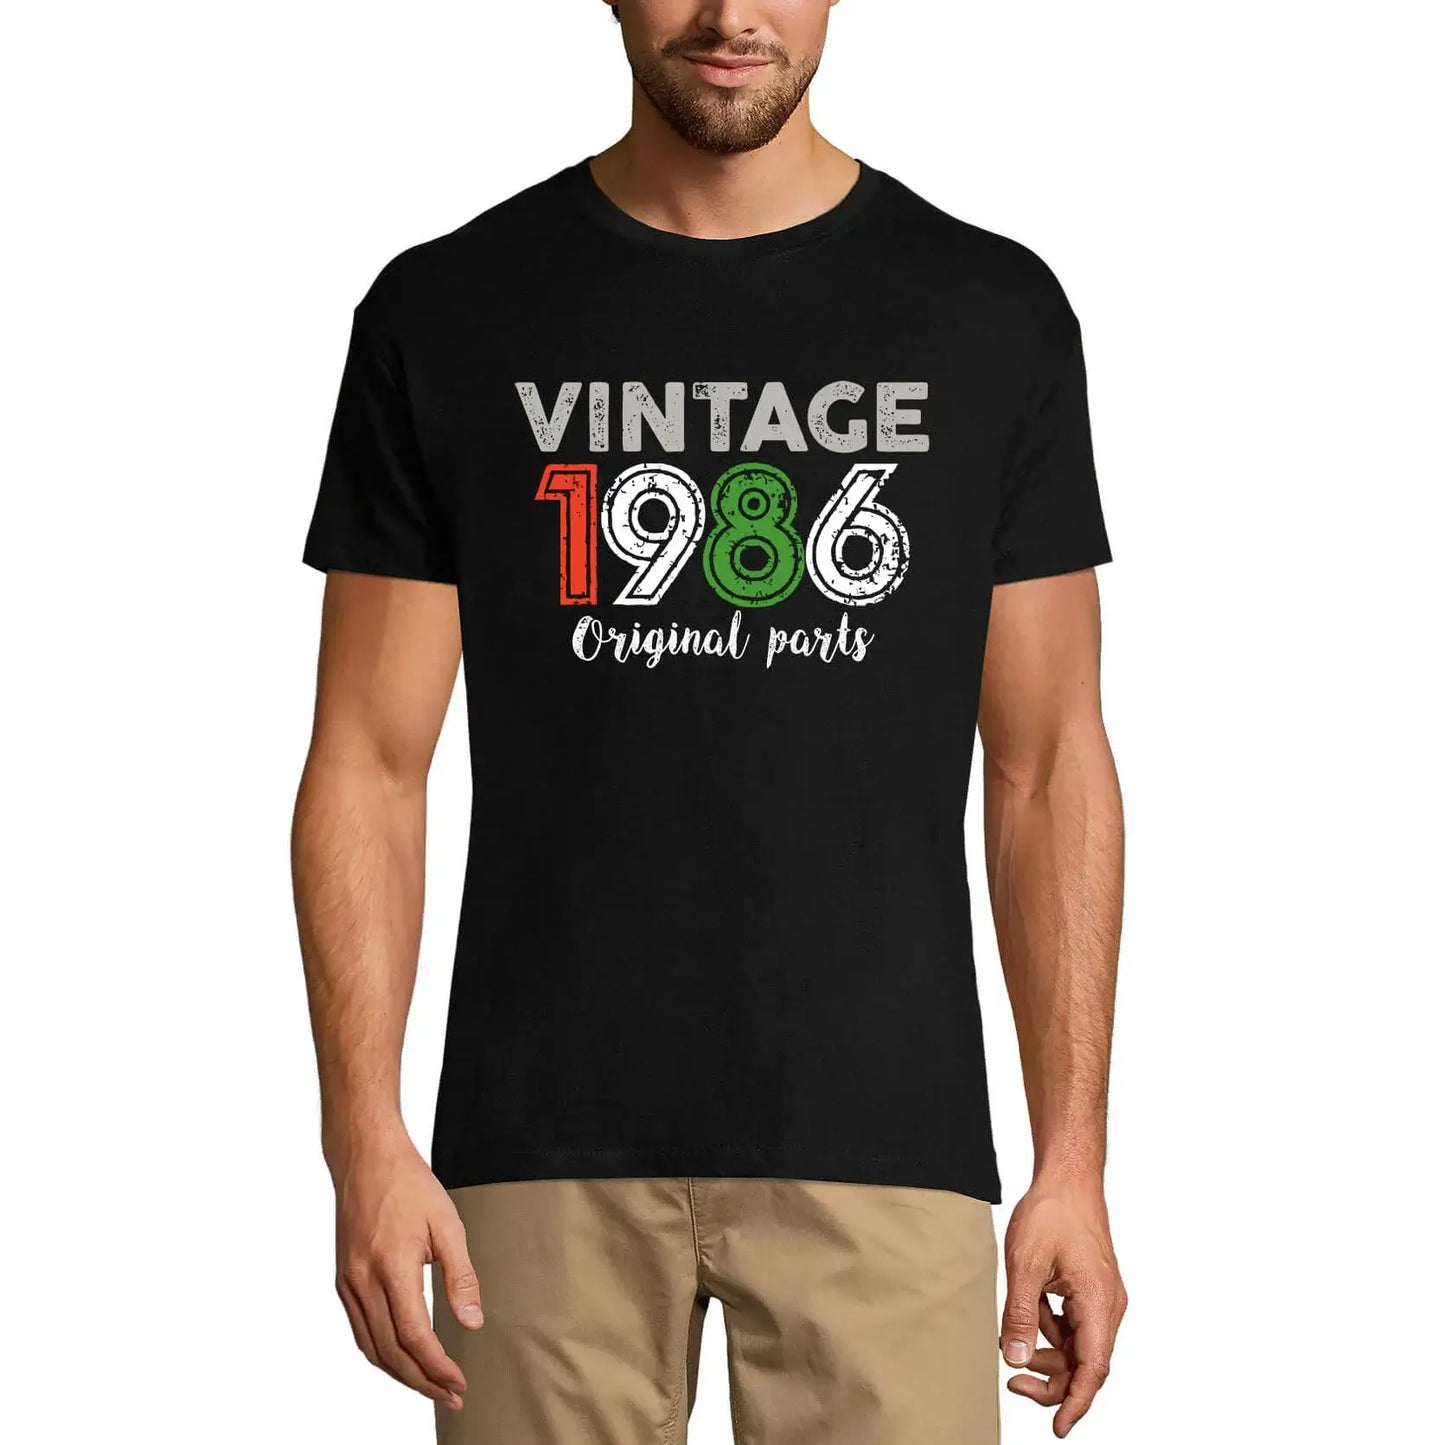 Men's Graphic T-Shirt Original Parts 1986 38th Birthday Anniversary 38 Year Old Gift 1986 Vintage Eco-Friendly Short Sleeve Novelty Tee